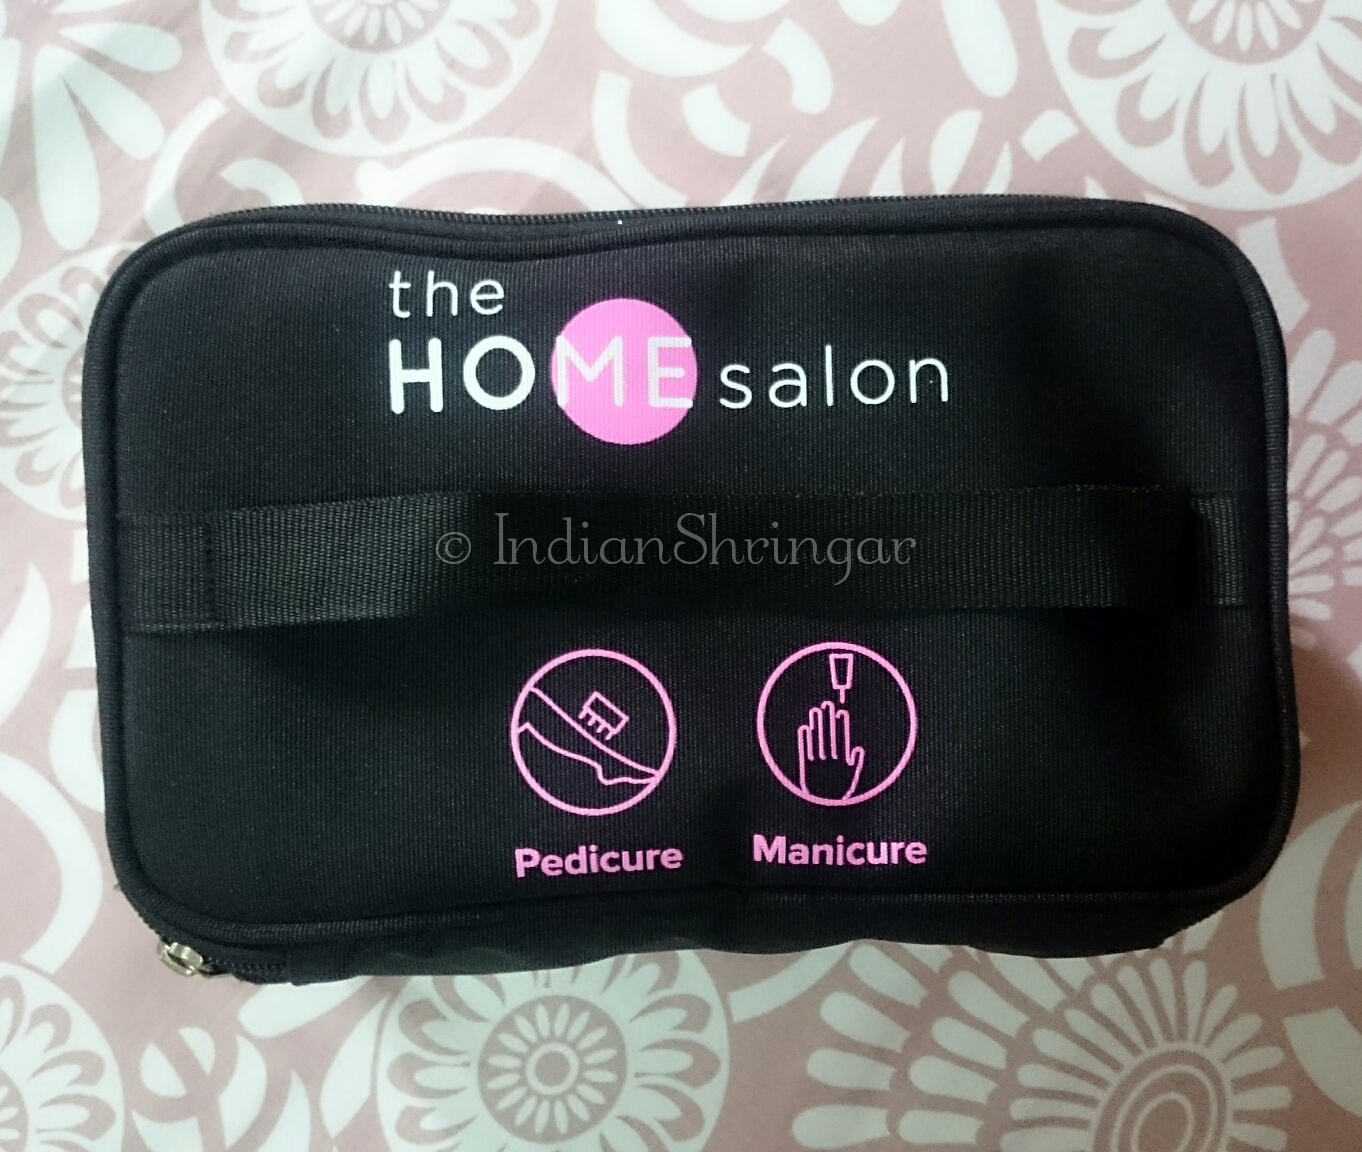 The Home Salon Experience, Review and Giveaway